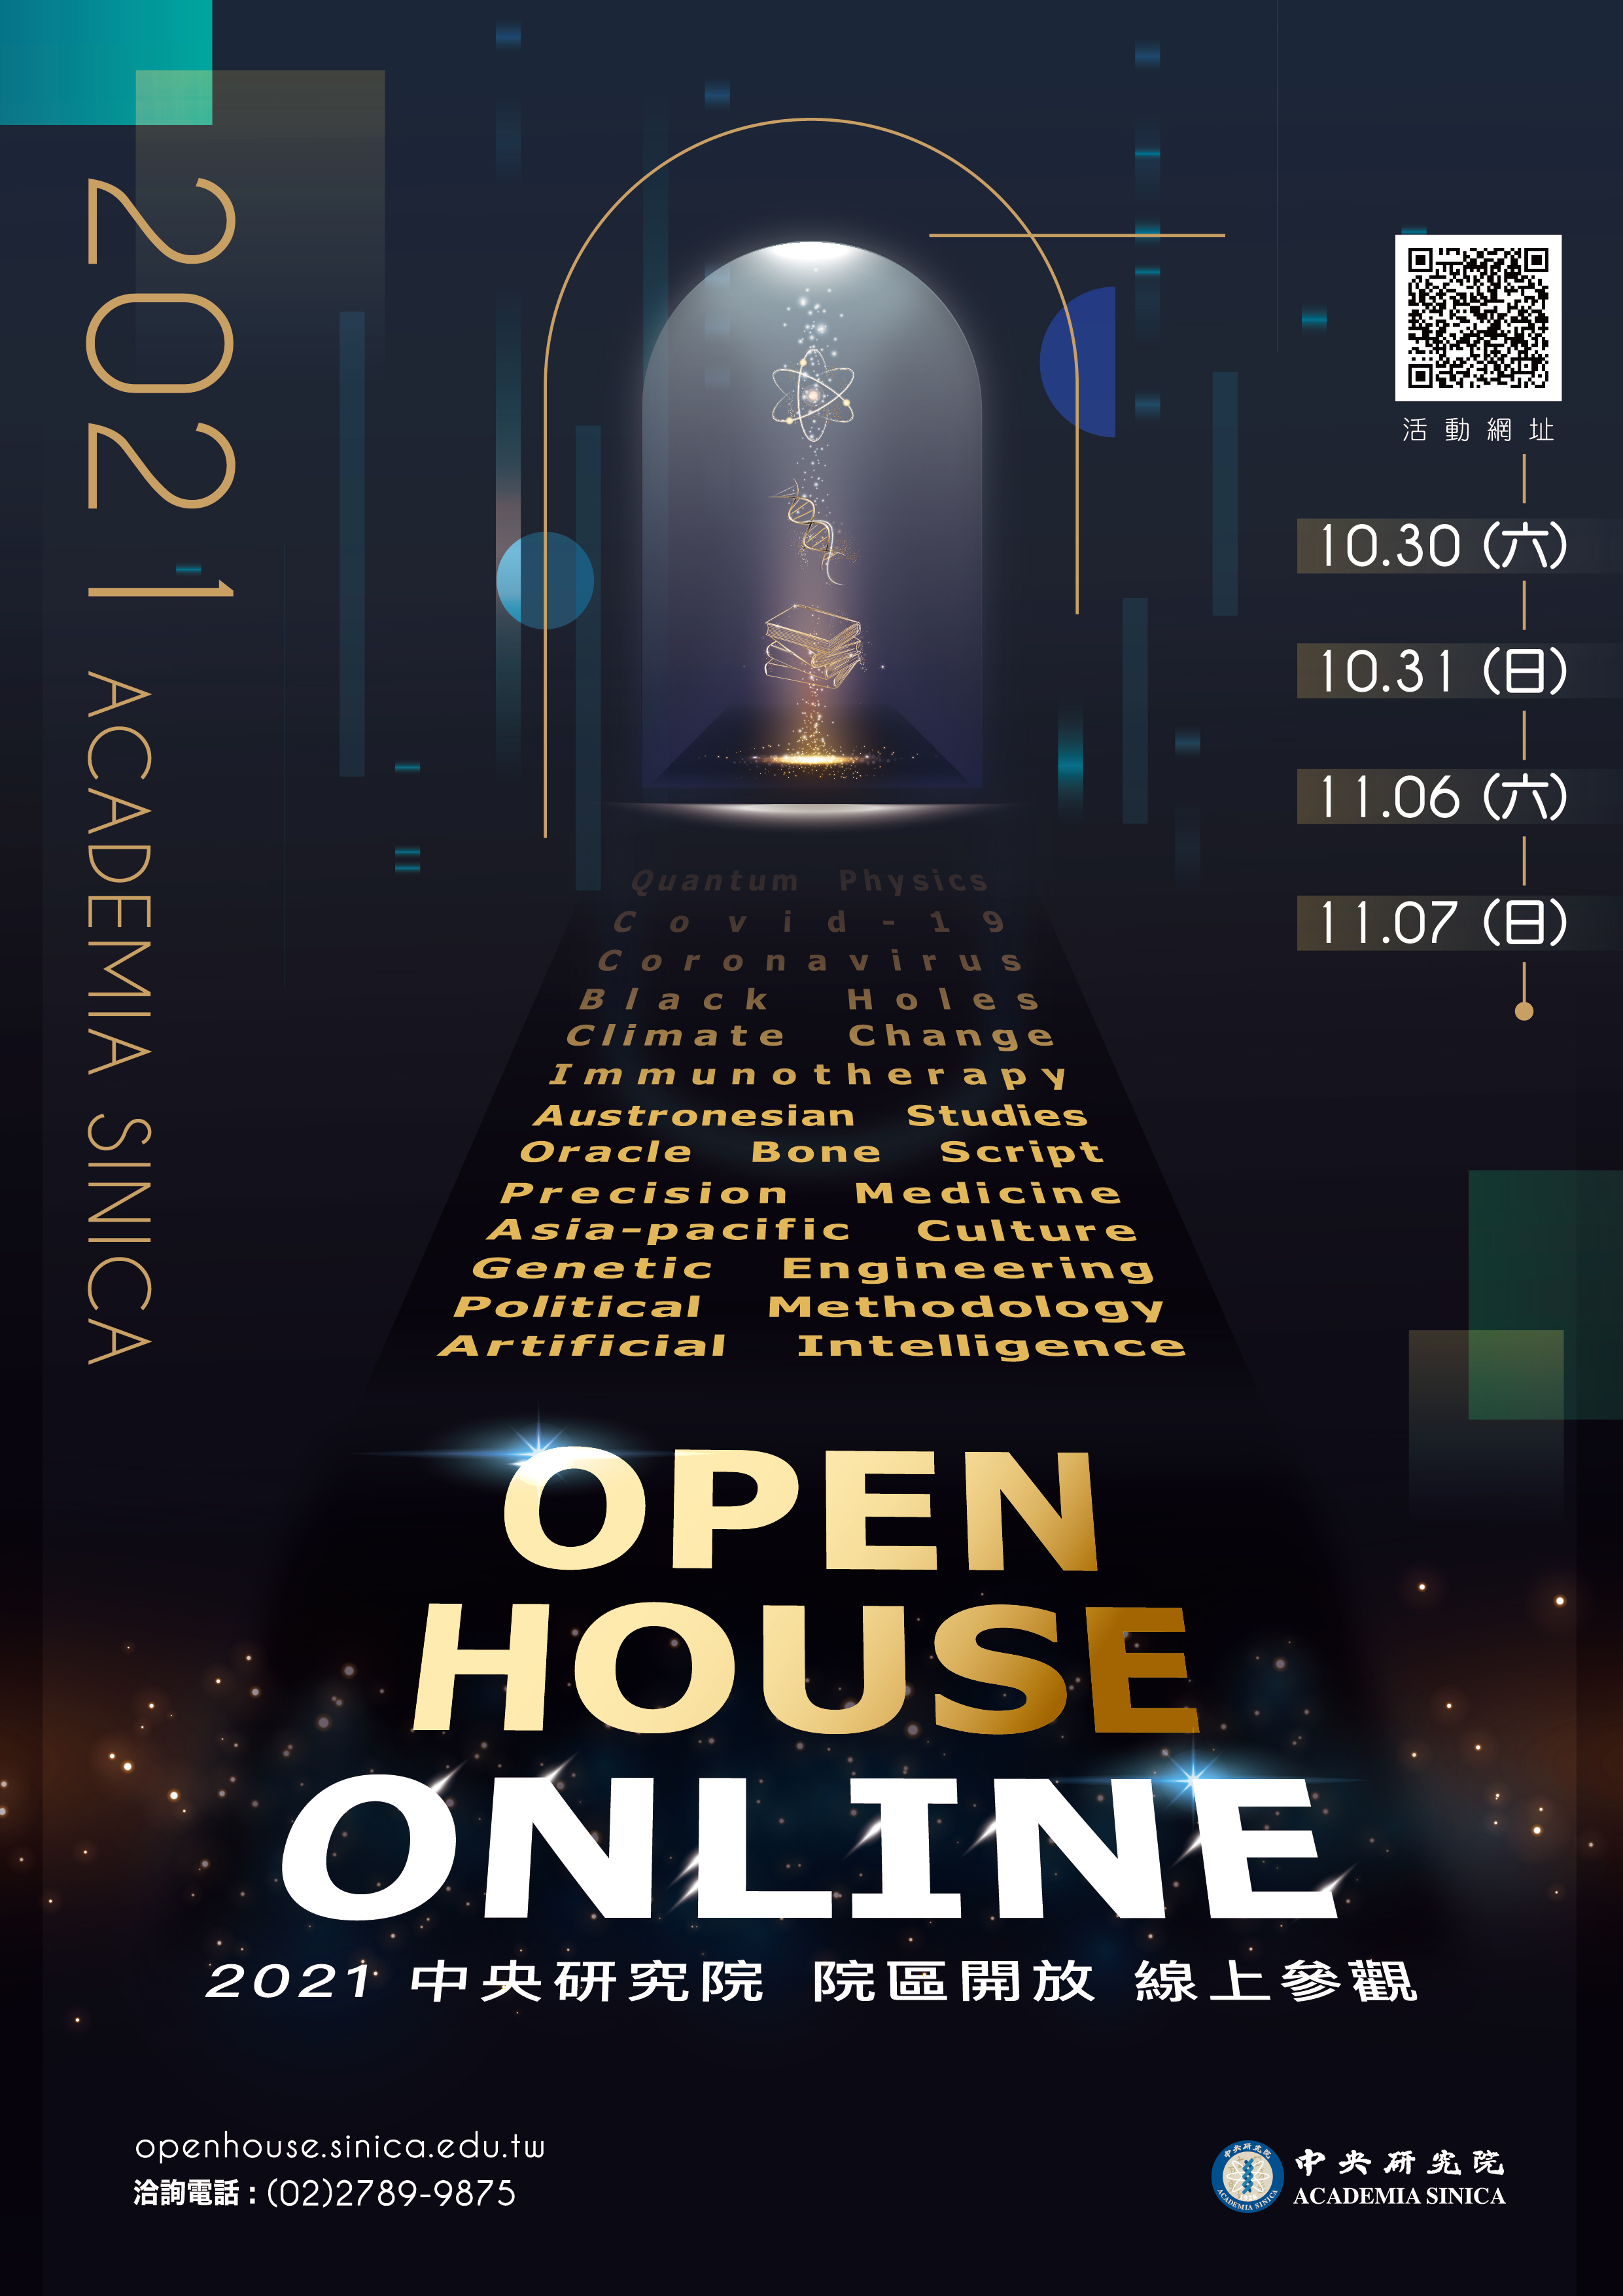 Academia Sinica’s First Online Open House Coming Soon!